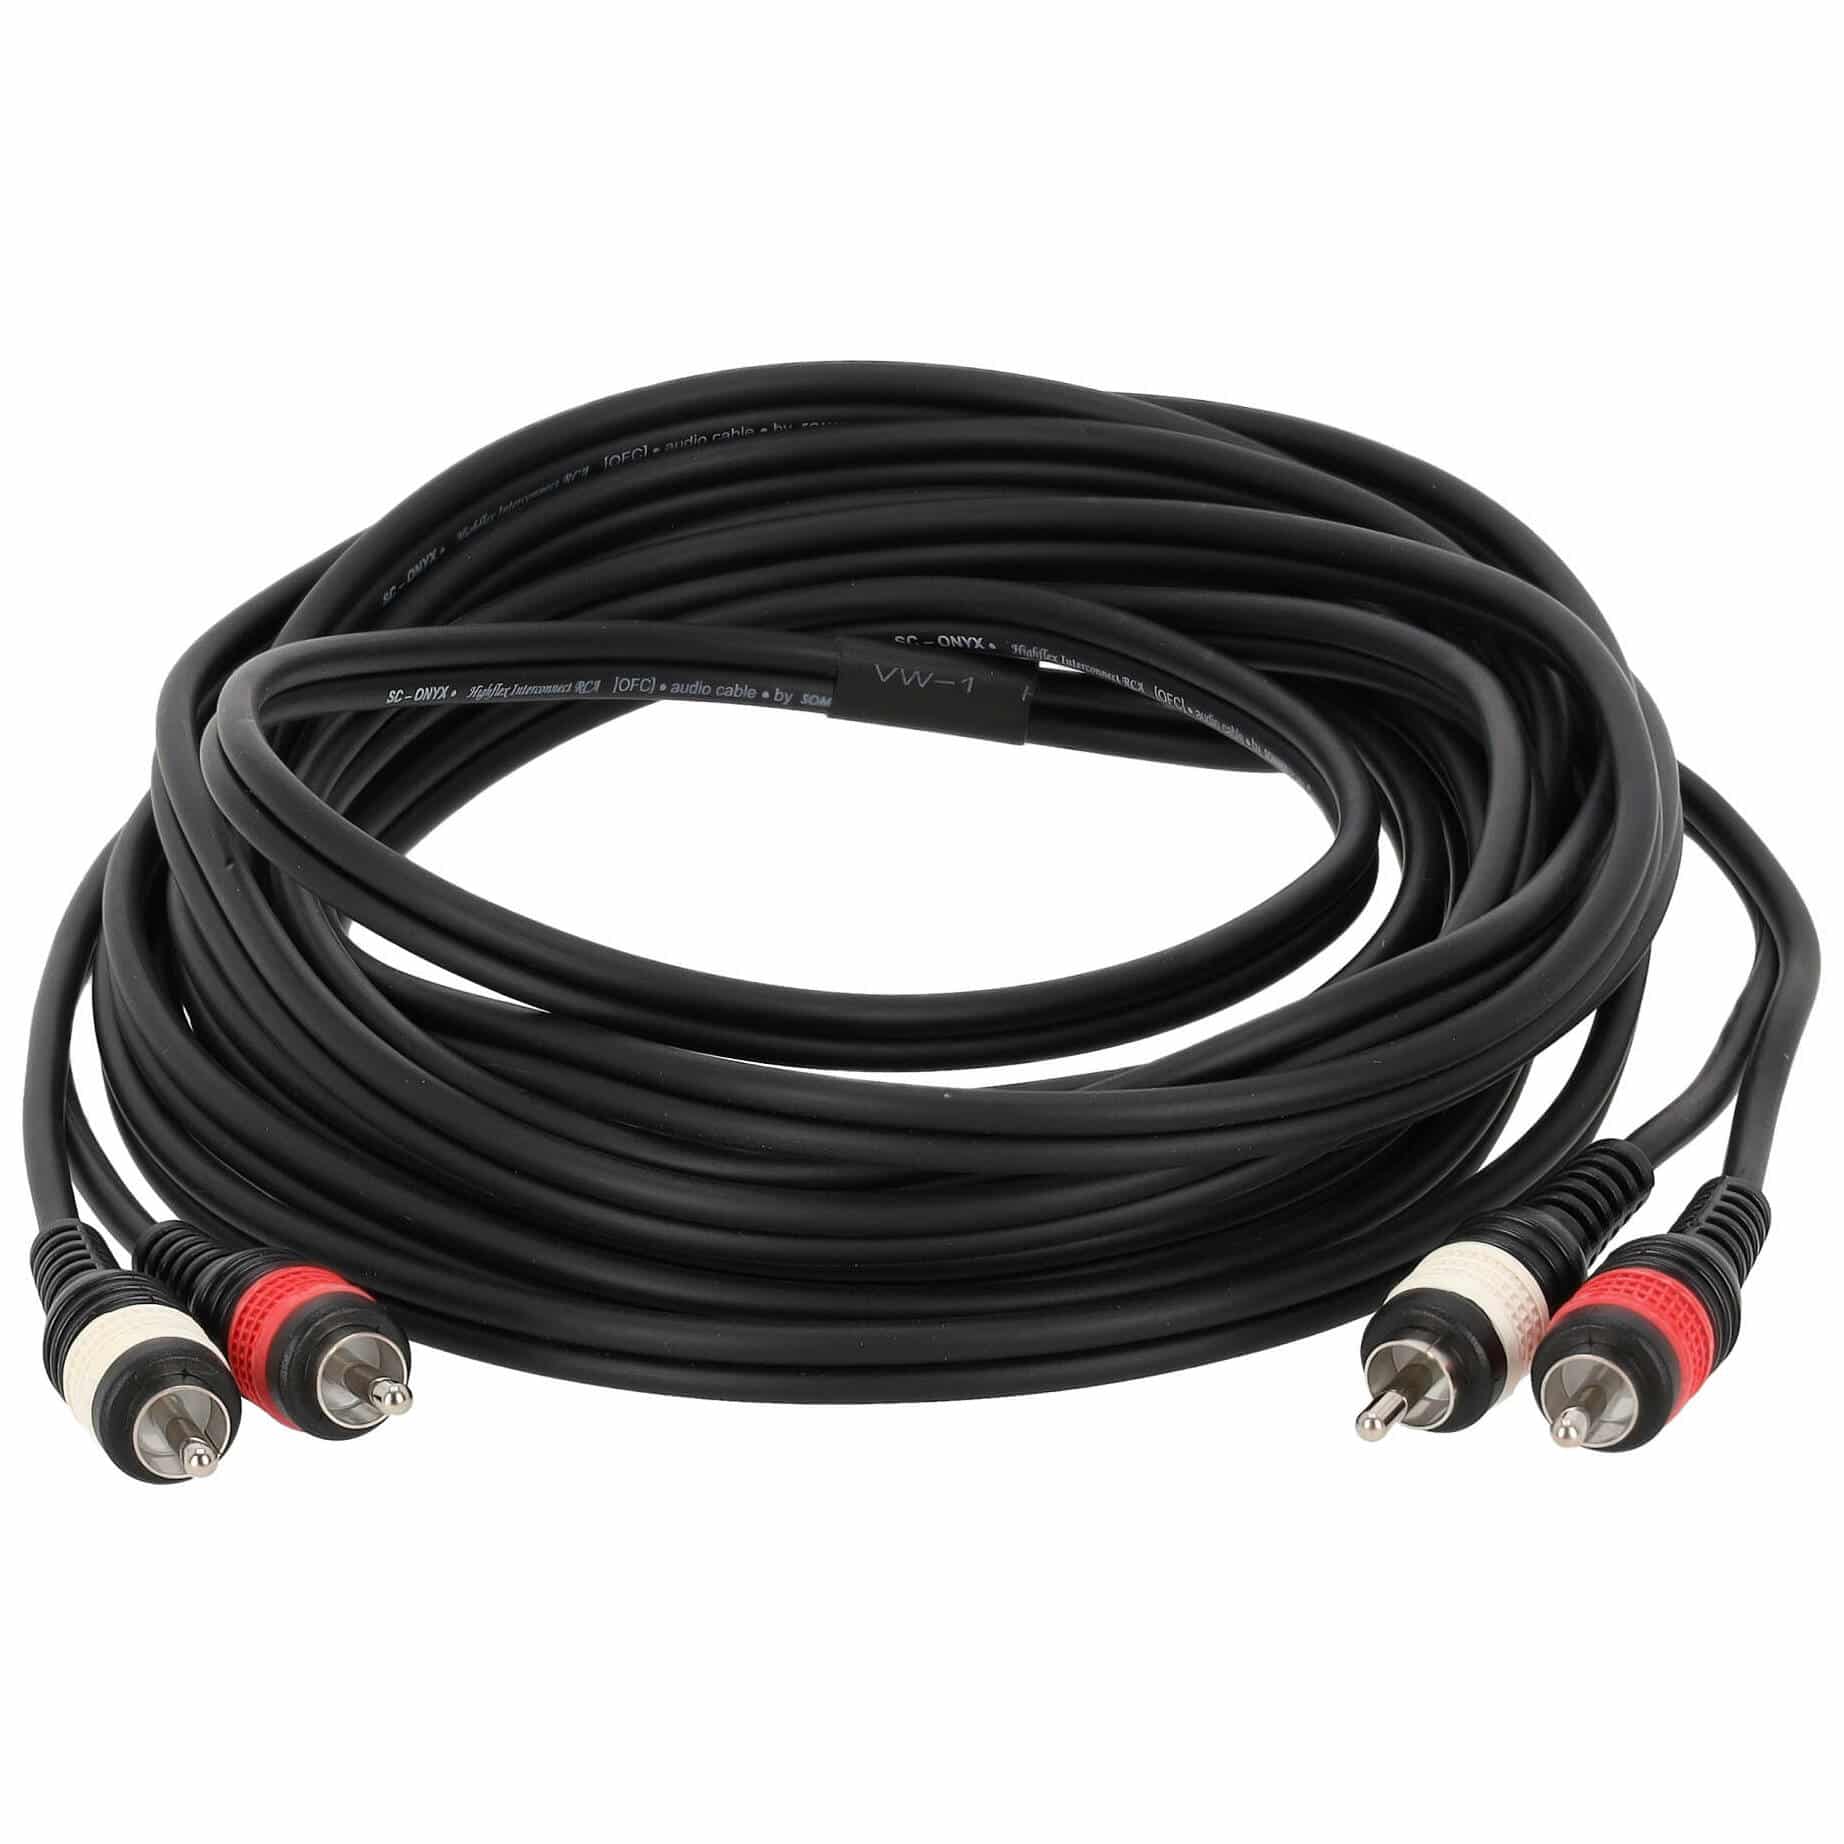 Sommer Cable BV-CICI-0600 SC-Onyx Basic 2 x Cinch Male - 2 x Cinch Male 6 Meter 1